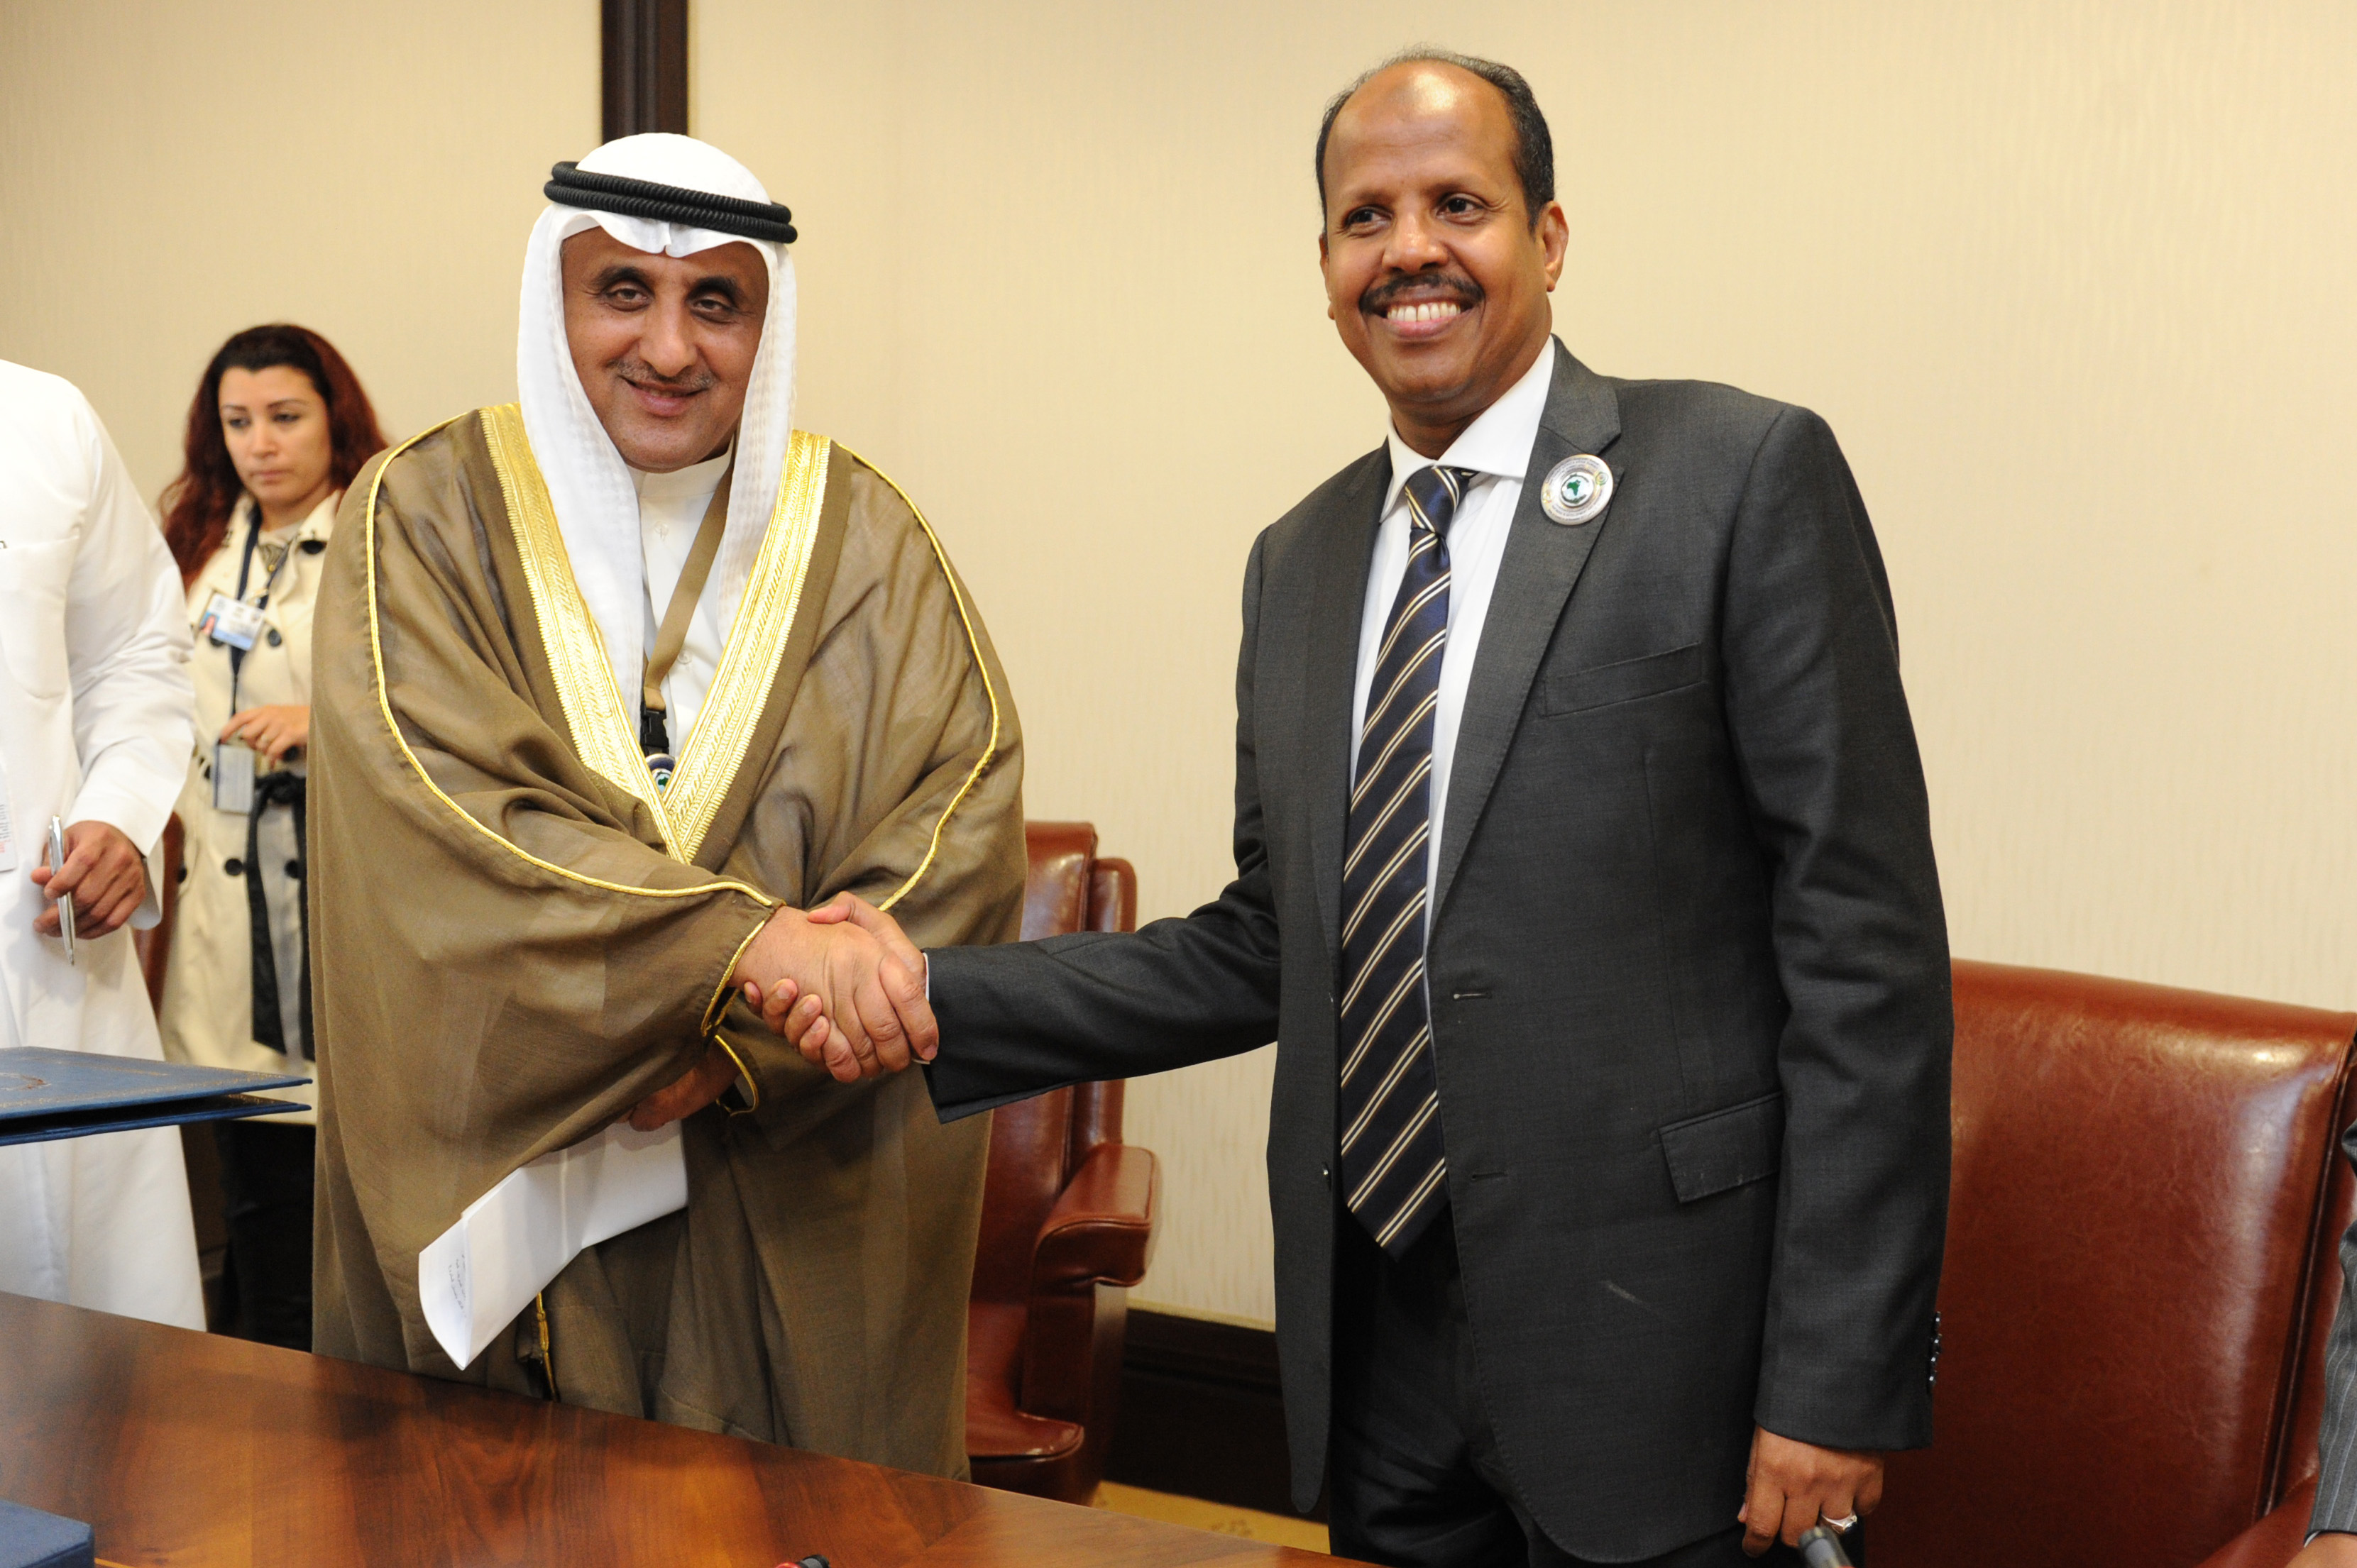 KFAED Director General Abdulwahab Al-Bader with the Djiboutian Minister of Foreign Affairs and International Cooperation Mahmoud Ali Youssouf during the signing ceremony